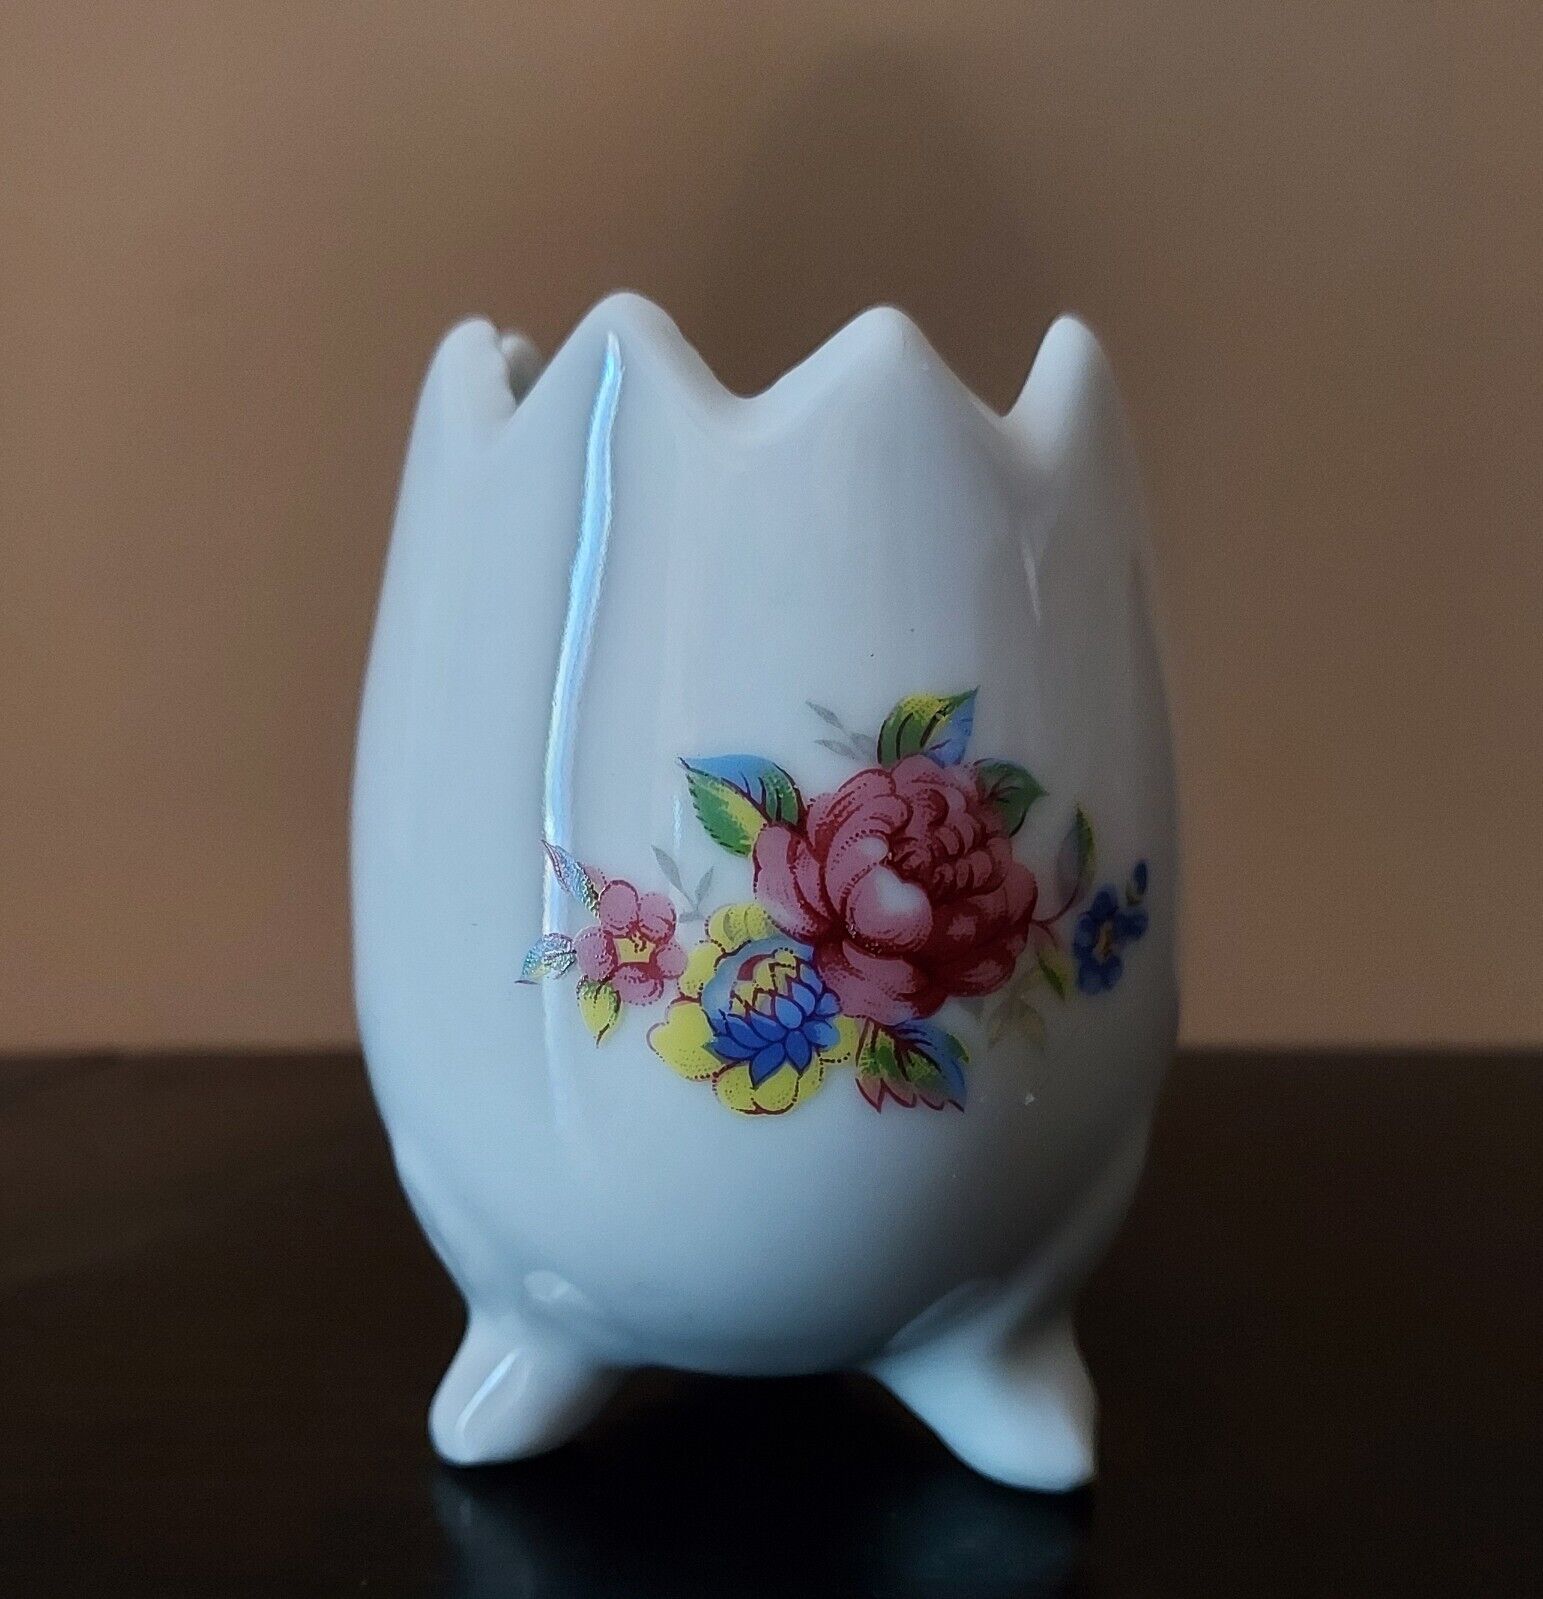 Small Cracked Egg Vase With Pink Rose